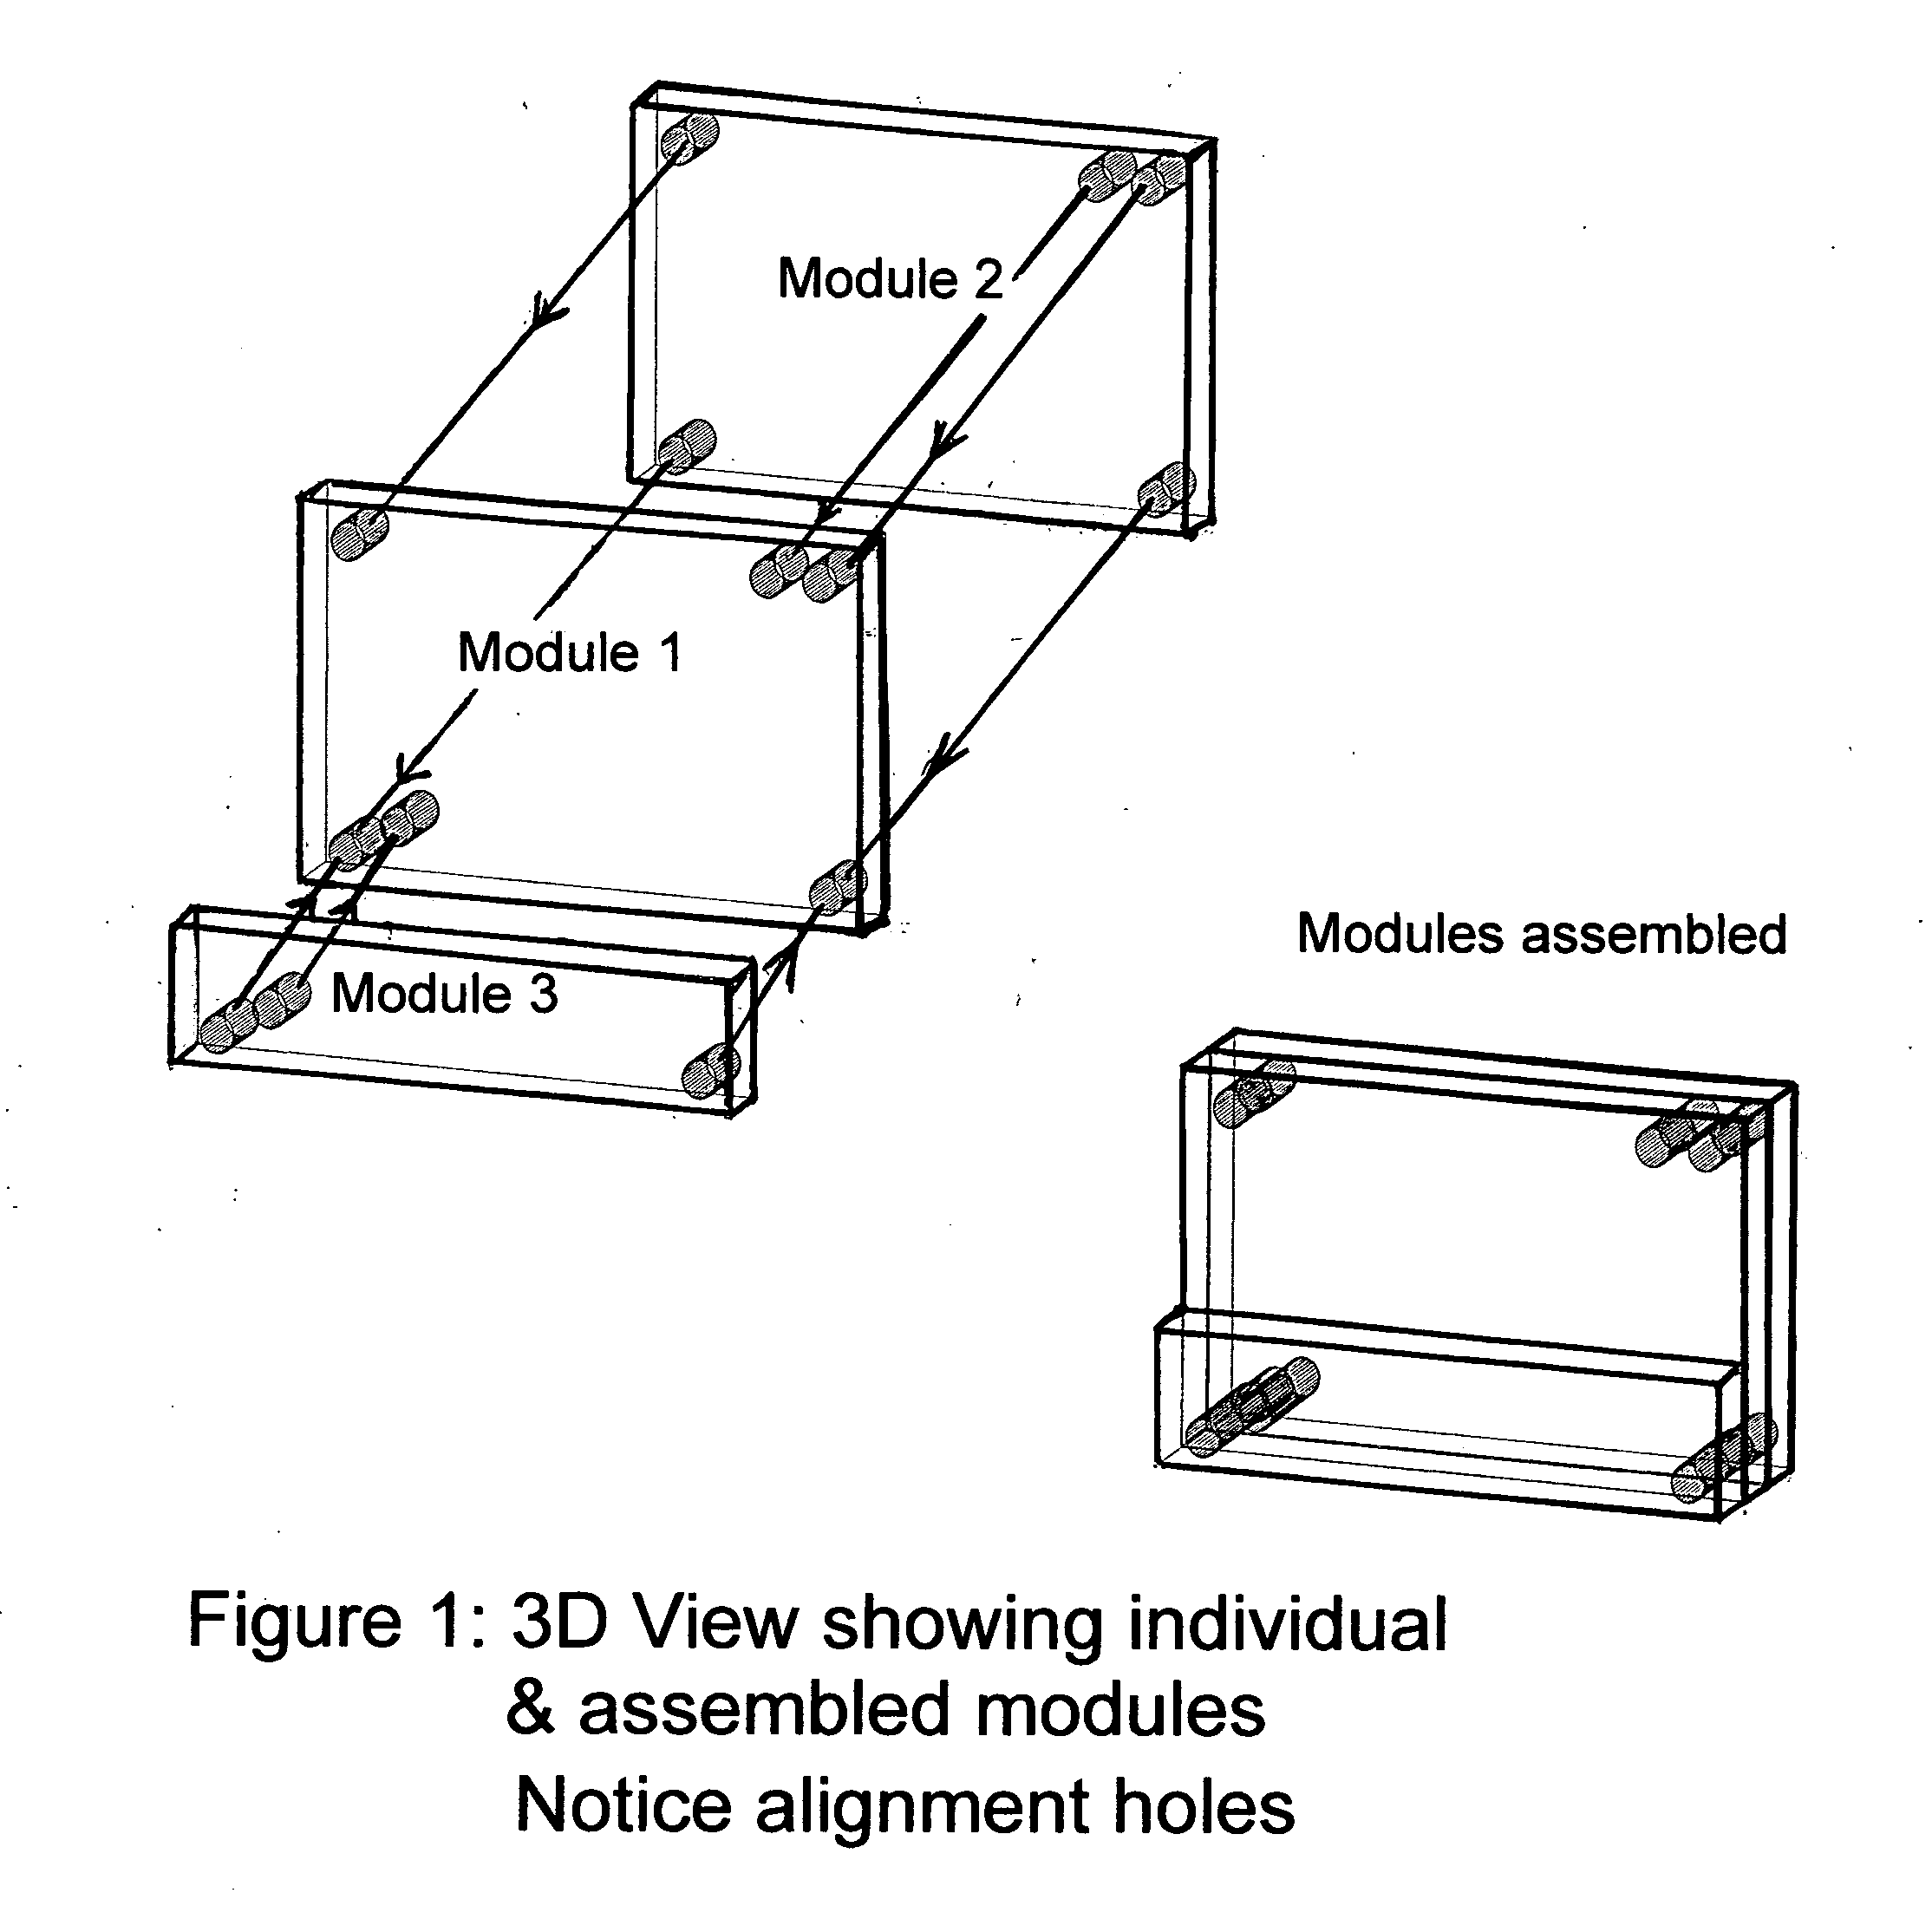 Robust modular electronic device without direct electrical connections for inter-module communication or control